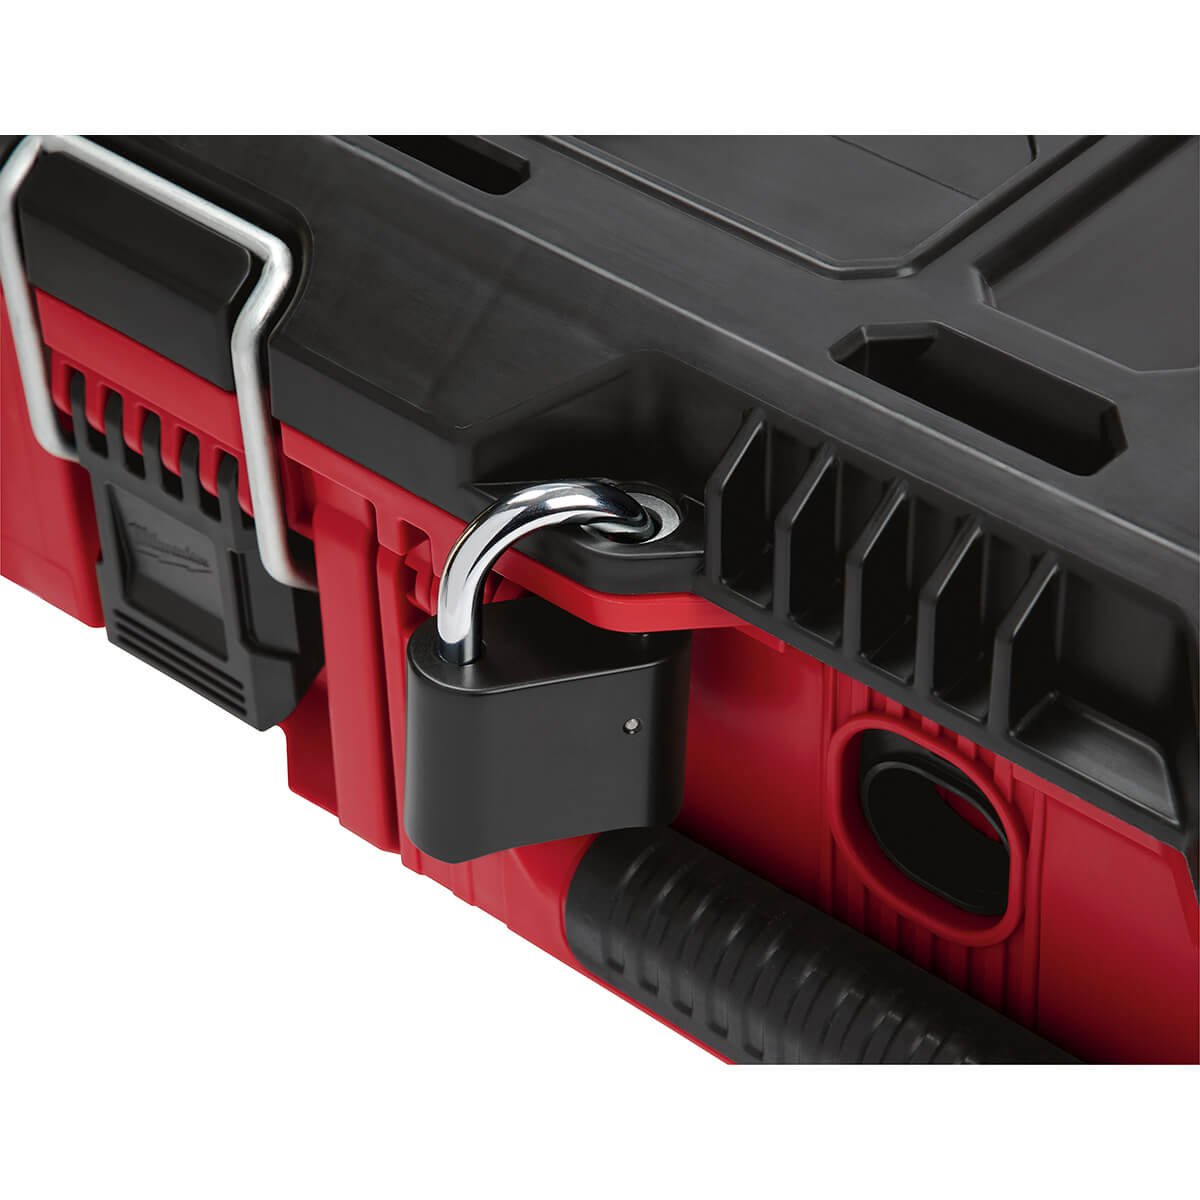 Milwaukee 48-22-8424 PackOut Power Tool Case